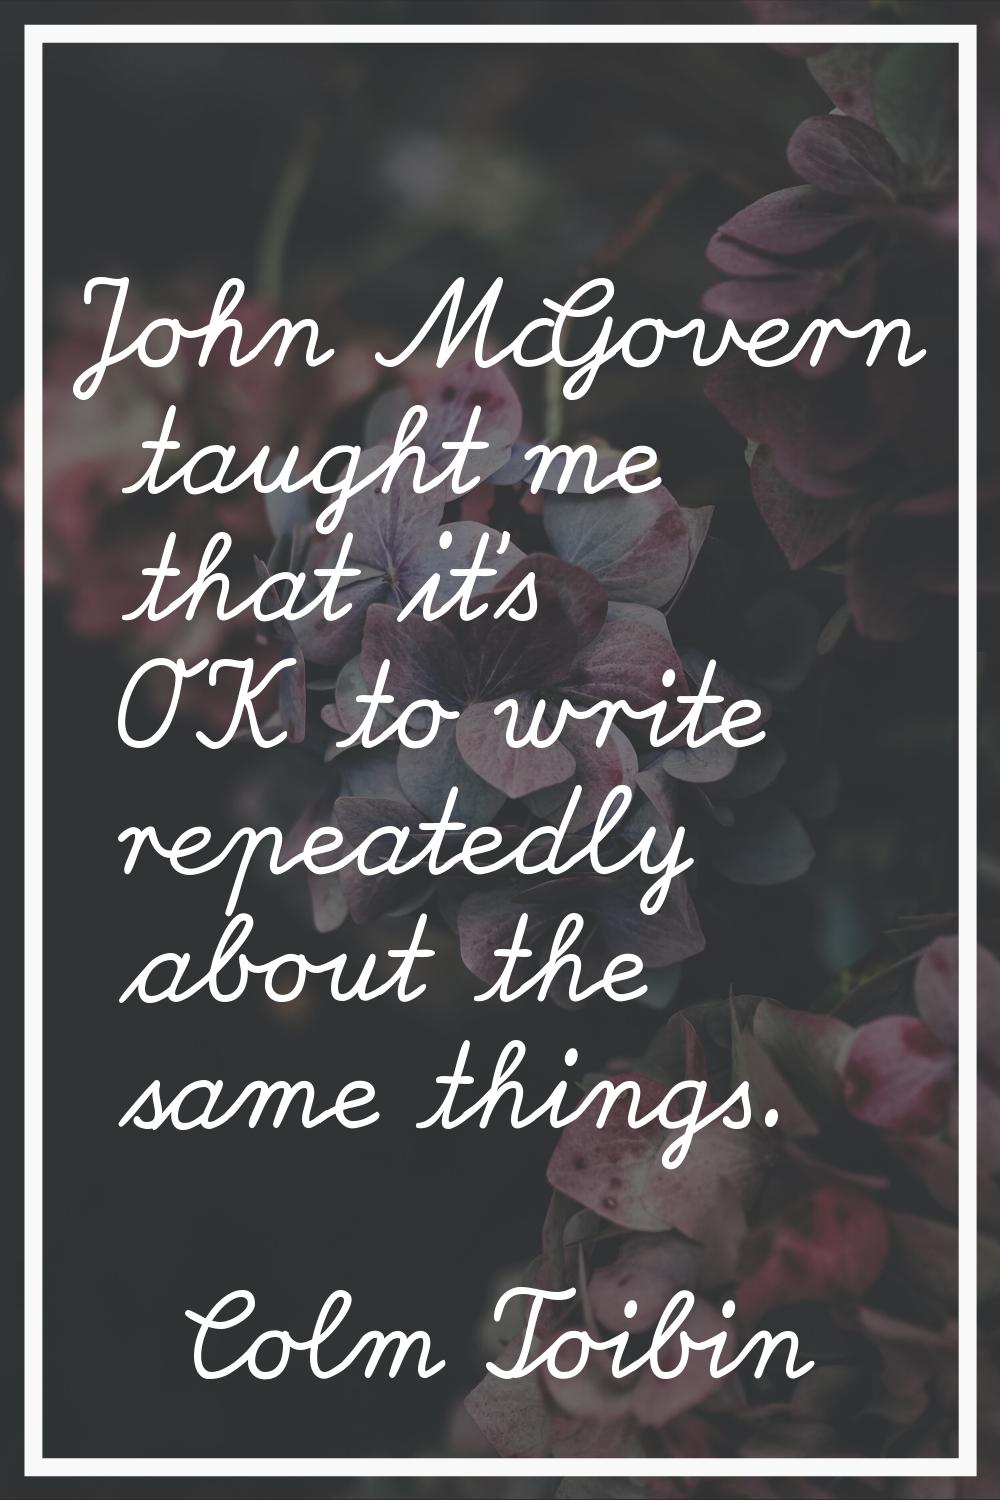 John McGovern taught me that it's OK to write repeatedly about the same things.